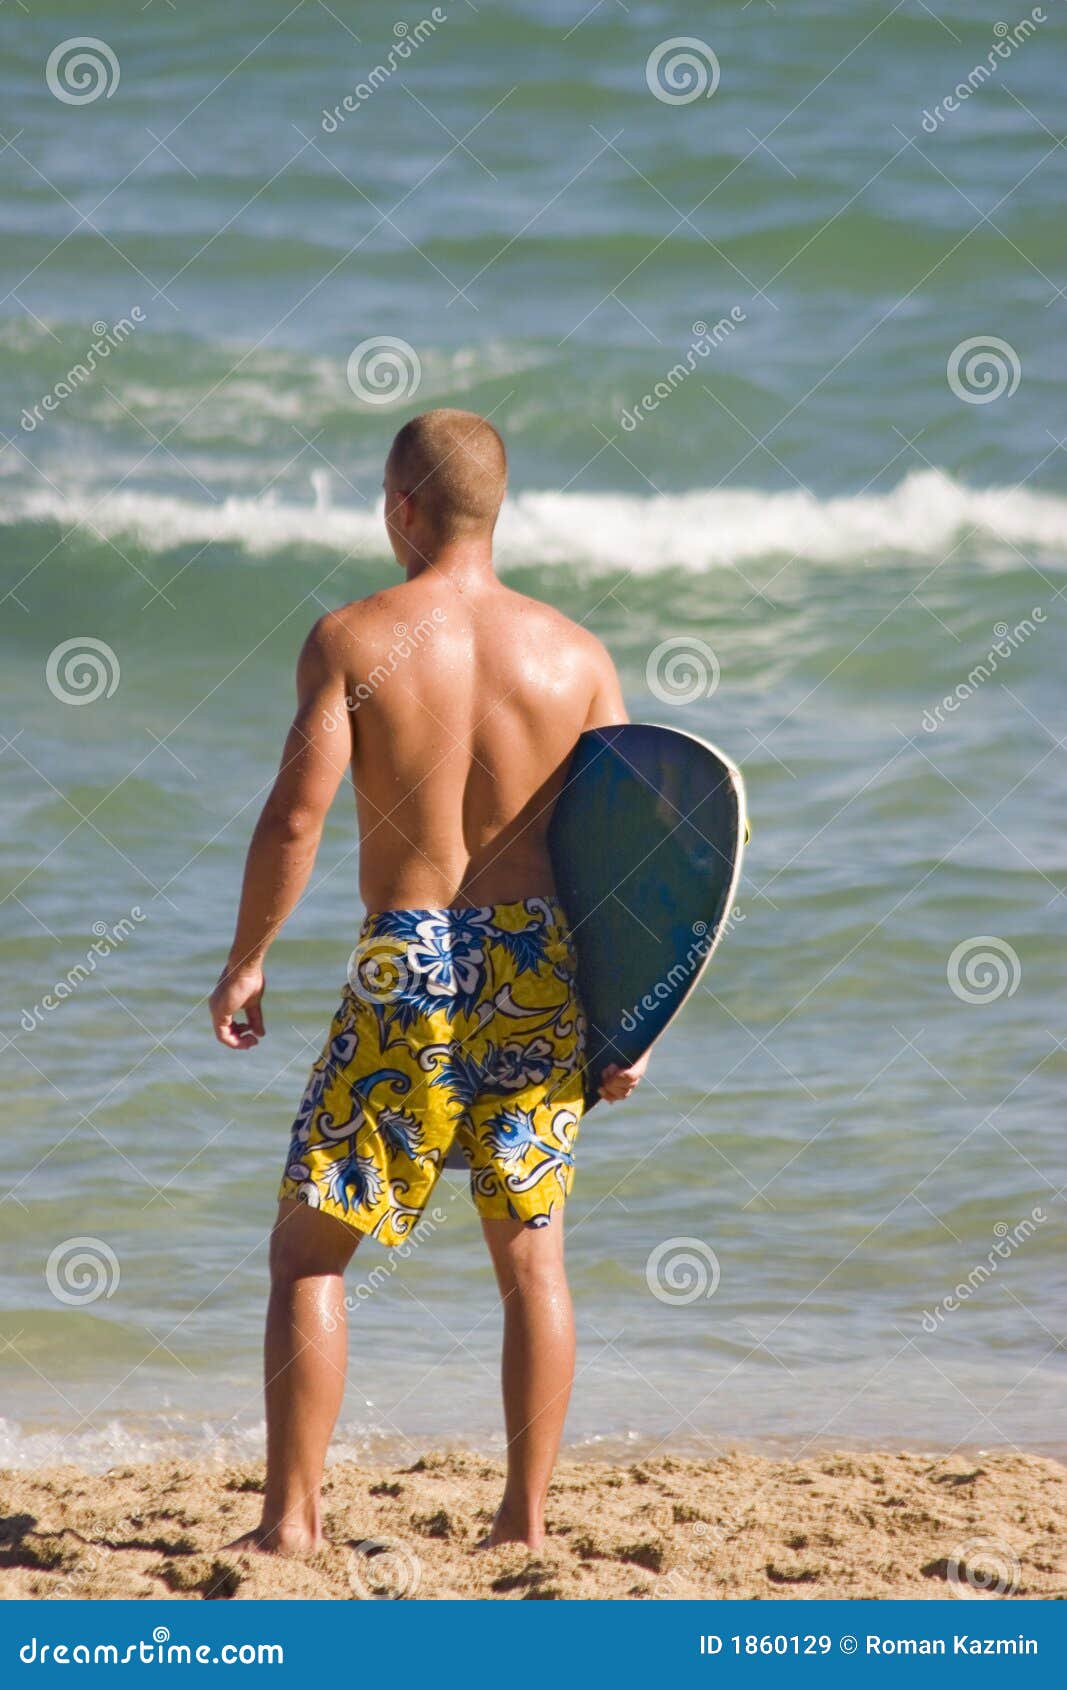 Surfer stock image. Image of muscles, excitement, summer - 1860129